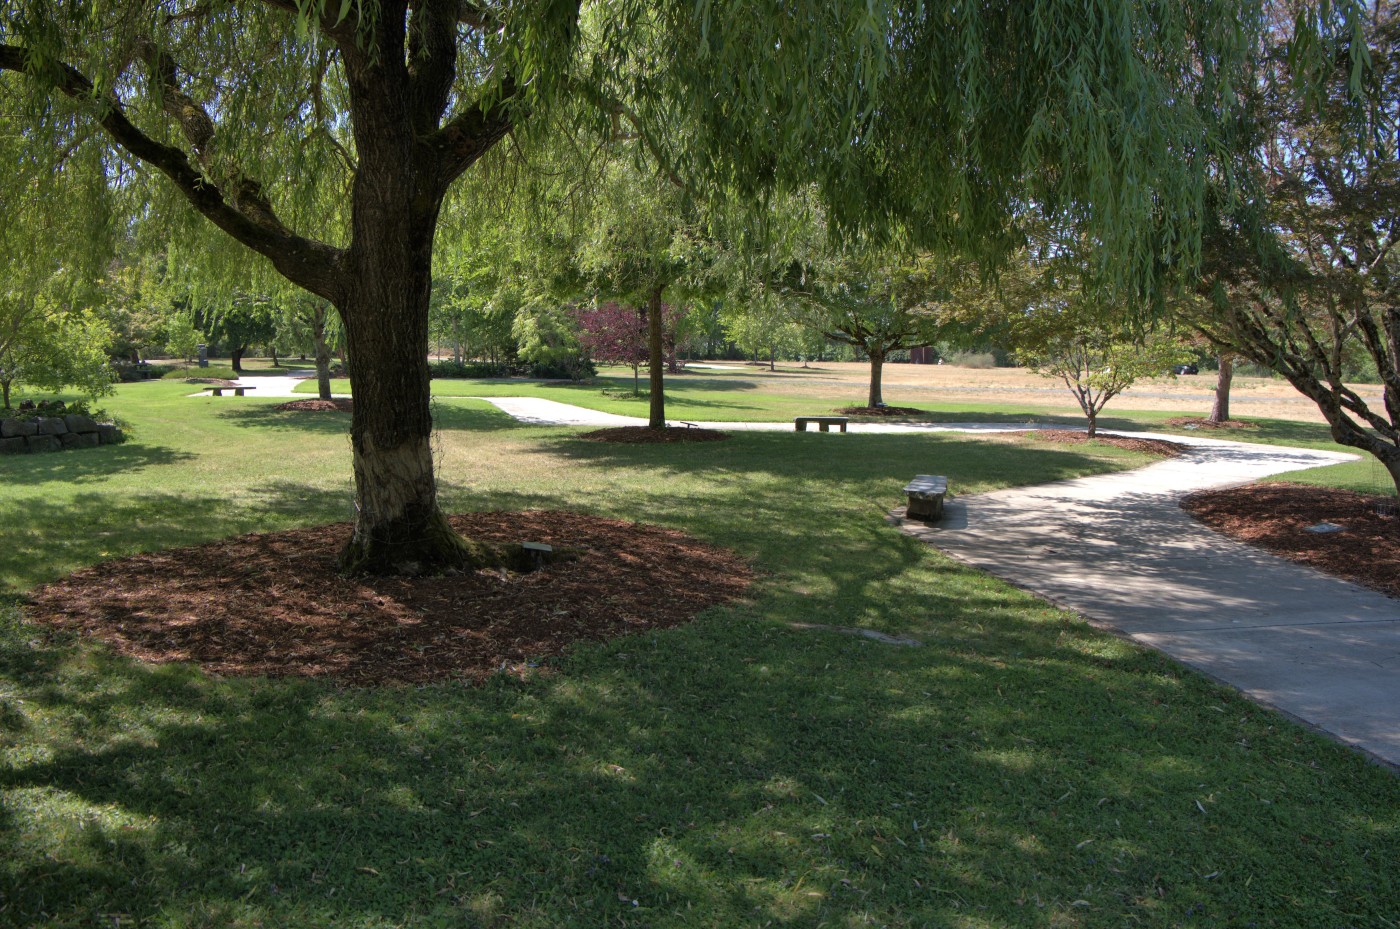 A sidewalk winding beneath trees in a park with benches.